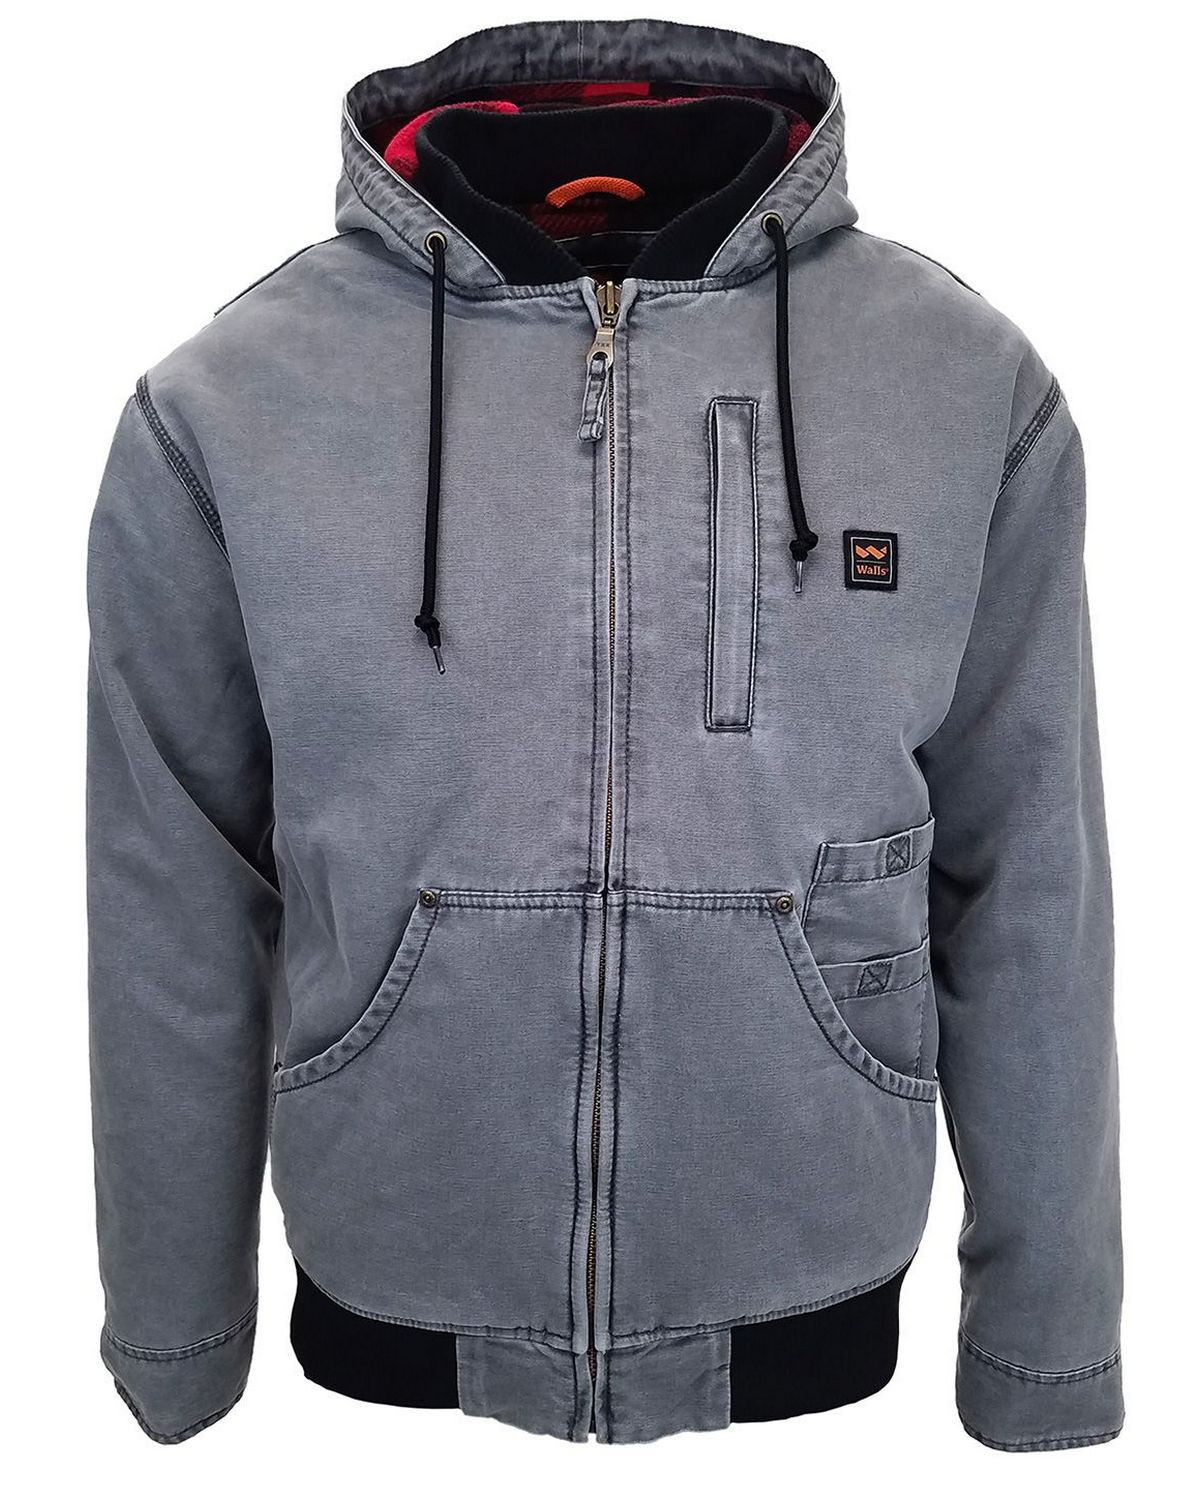 Walls Outdoor YJ339T Unisex Tall Vintage Duck Hooded Jacket - Washed Graphite - LT #vintage